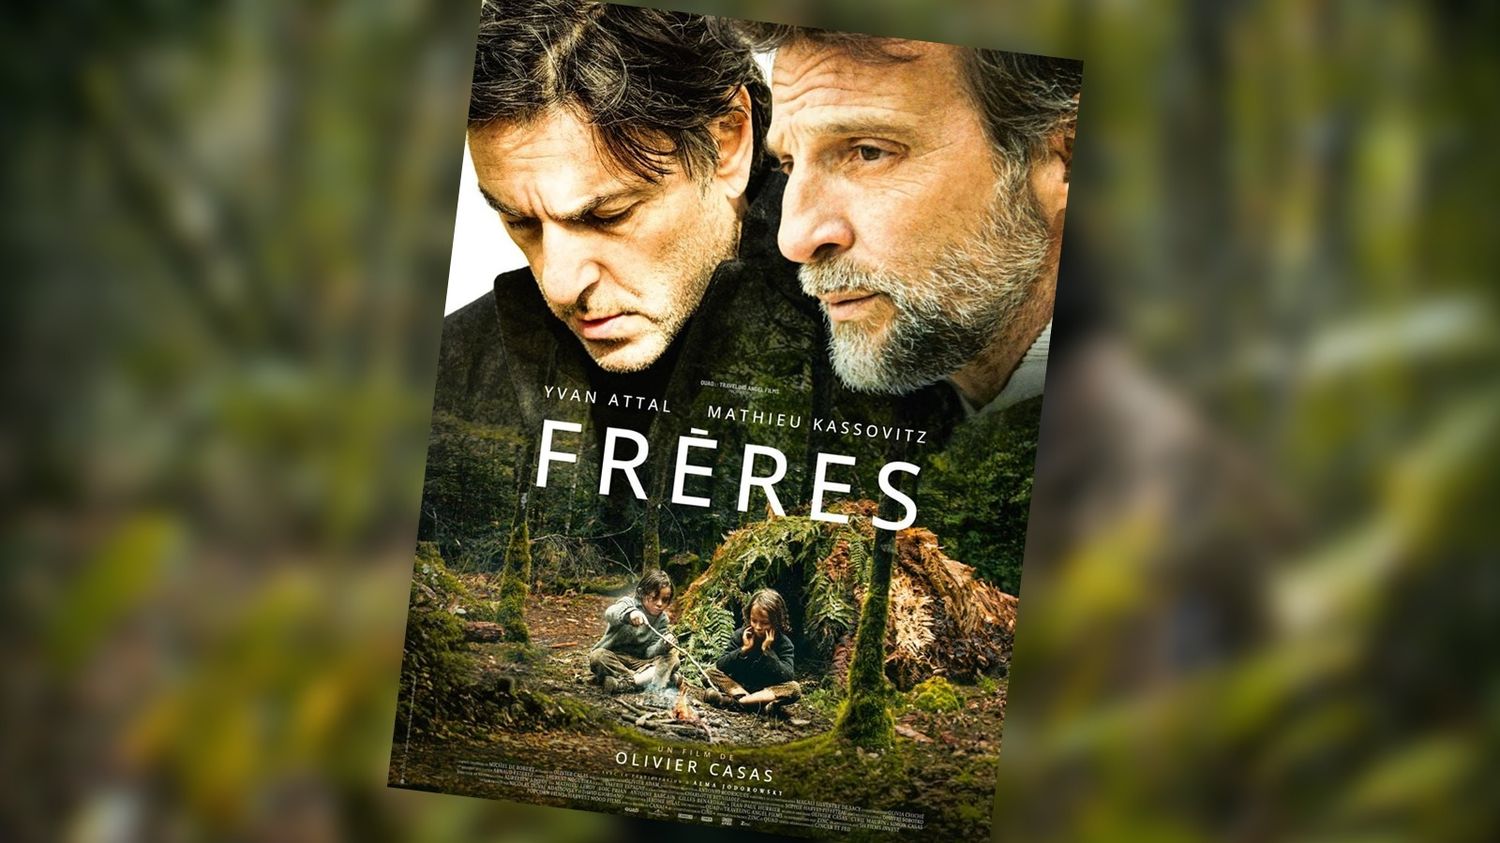 "There is no one to tell you anything": Michel de Robert talks about his childhood spent deep in the forest with his brother